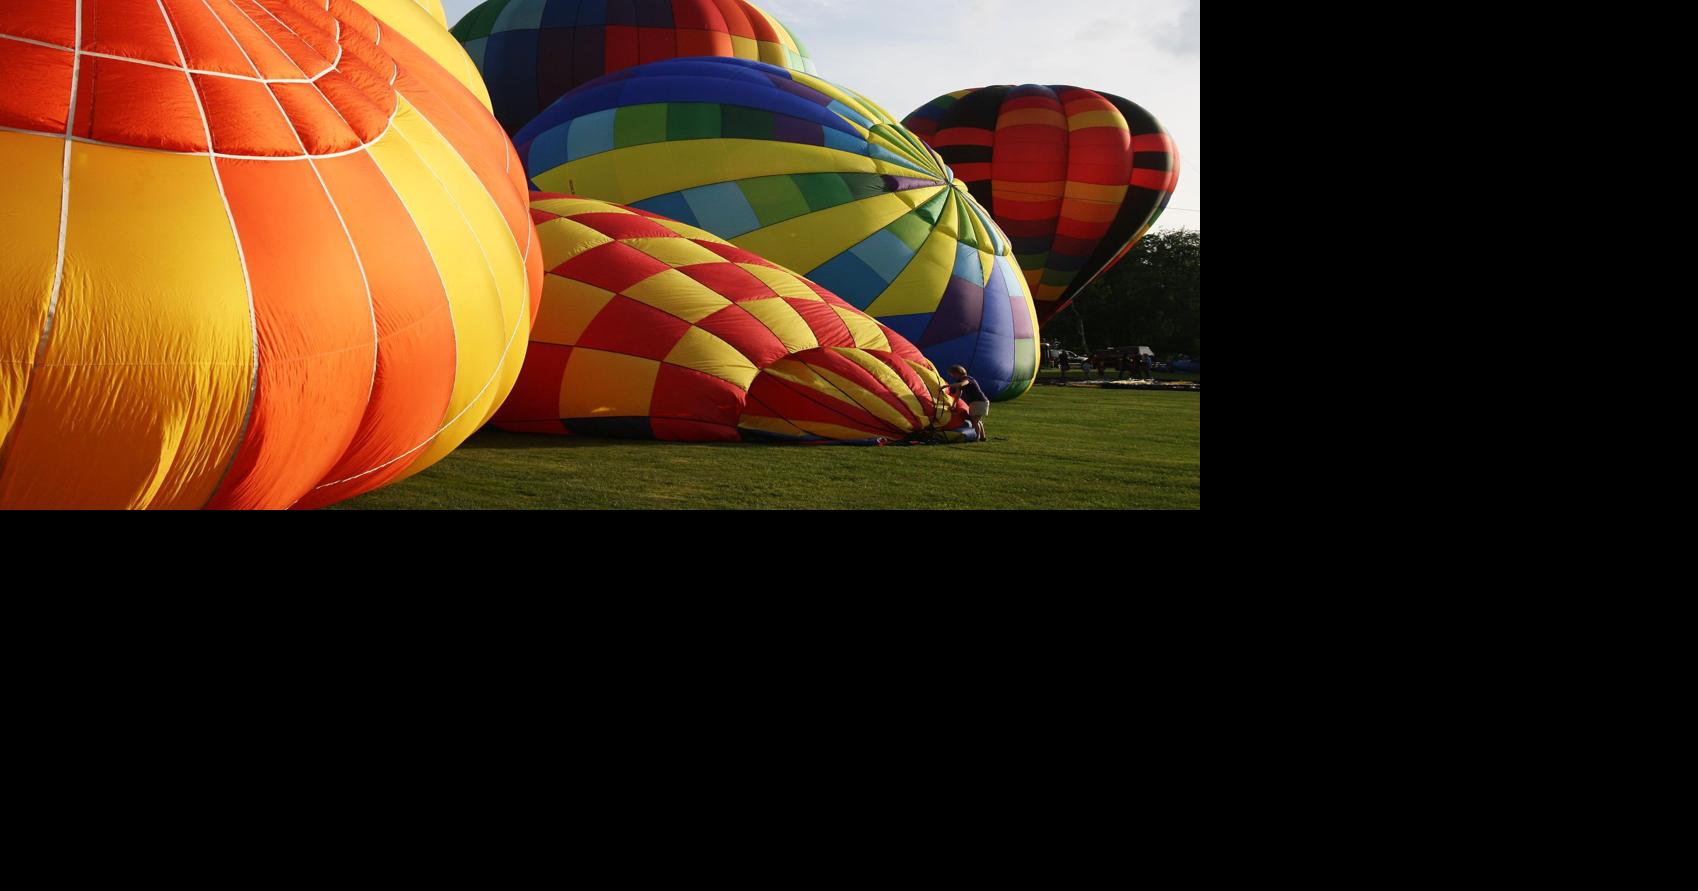 Changes, additions planned for Cambridge Balloon Festival